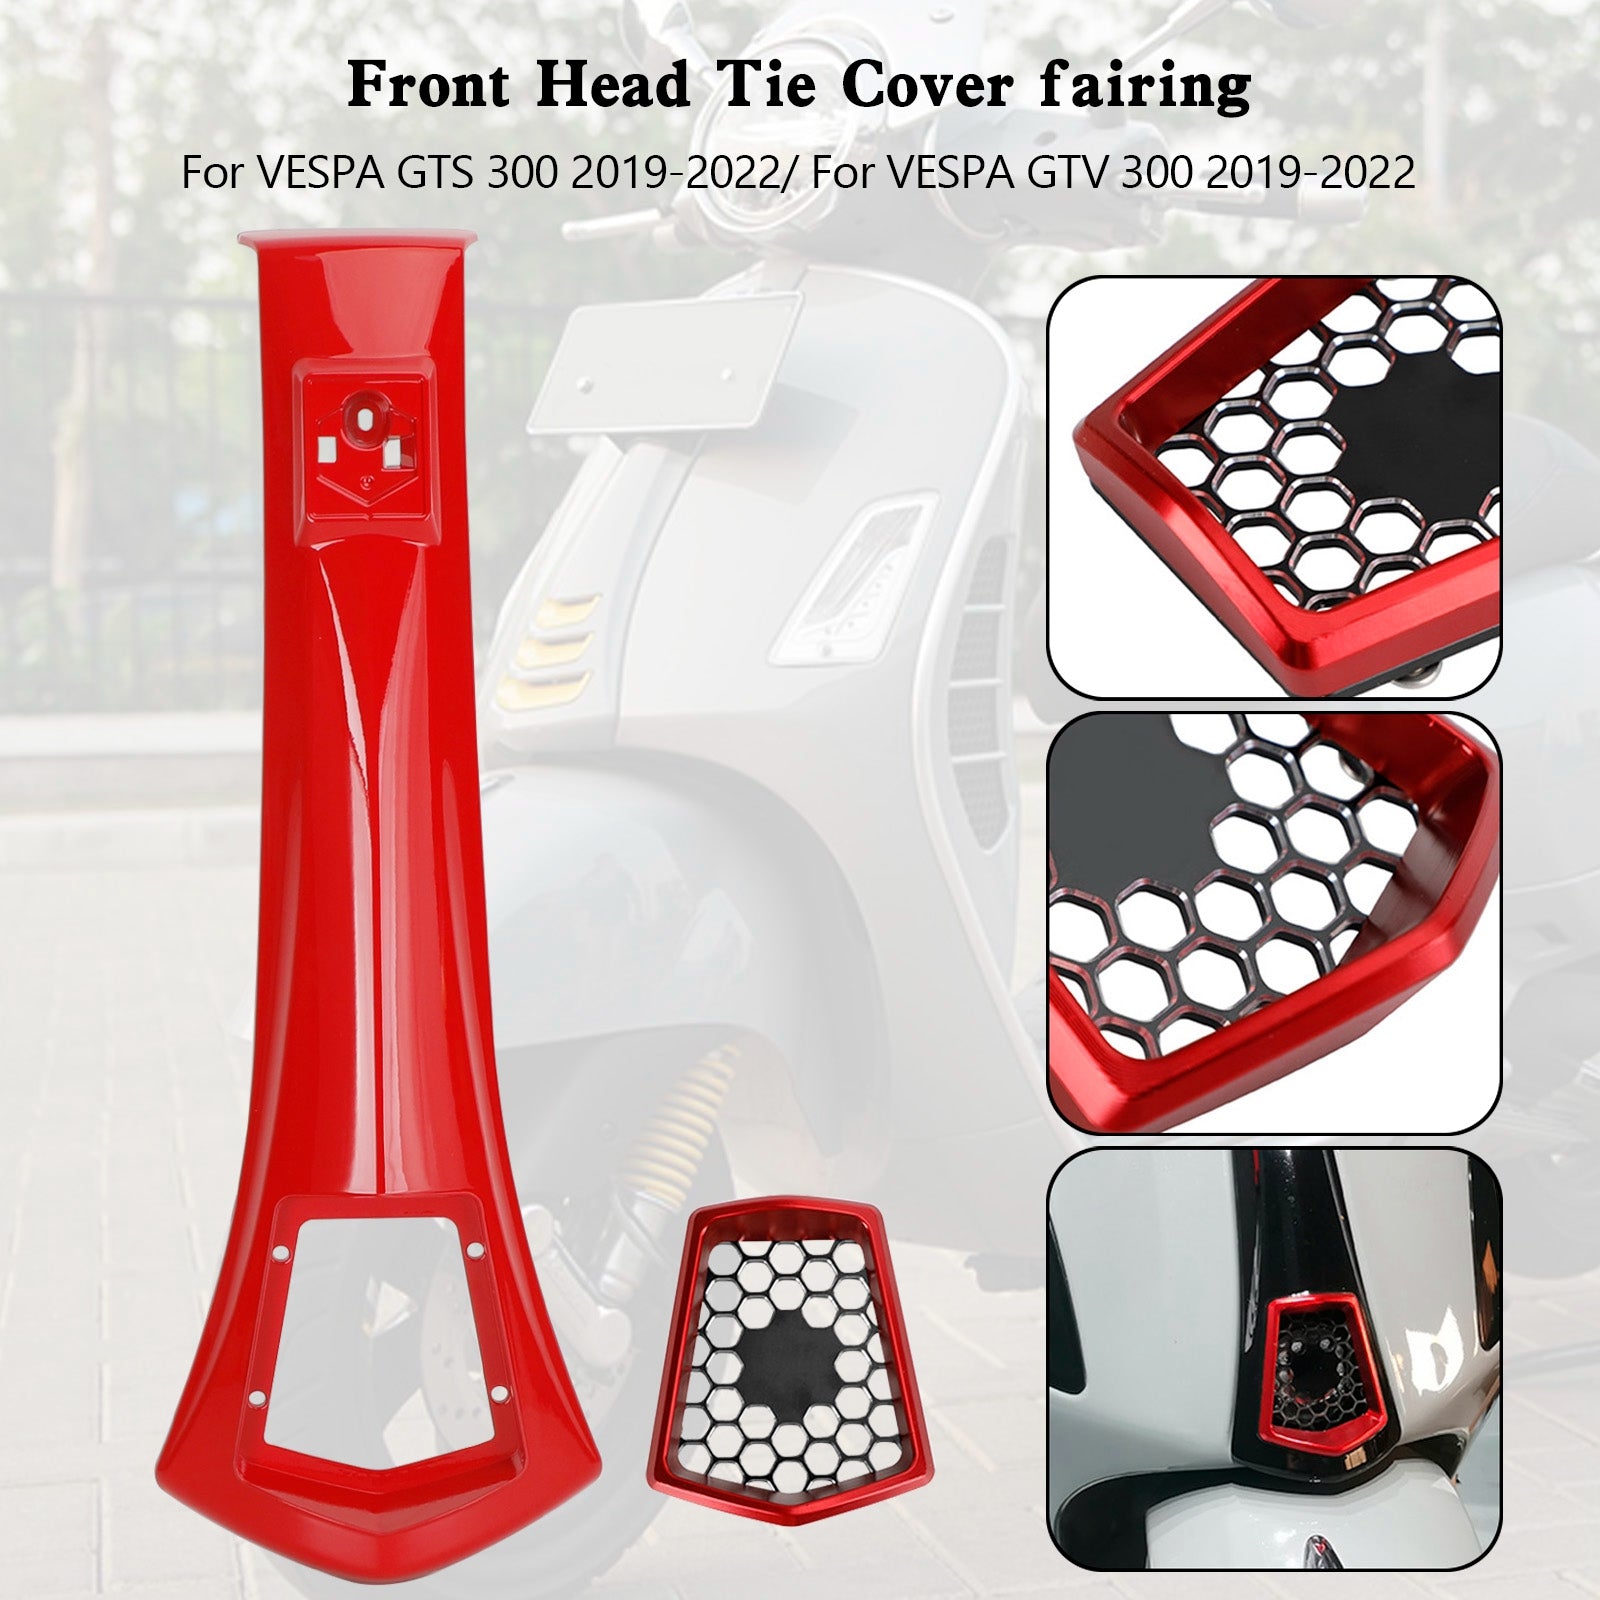 Front Head Cover Horn fairing Tie For VESPA GTS 300 GTV 300 2019-2022